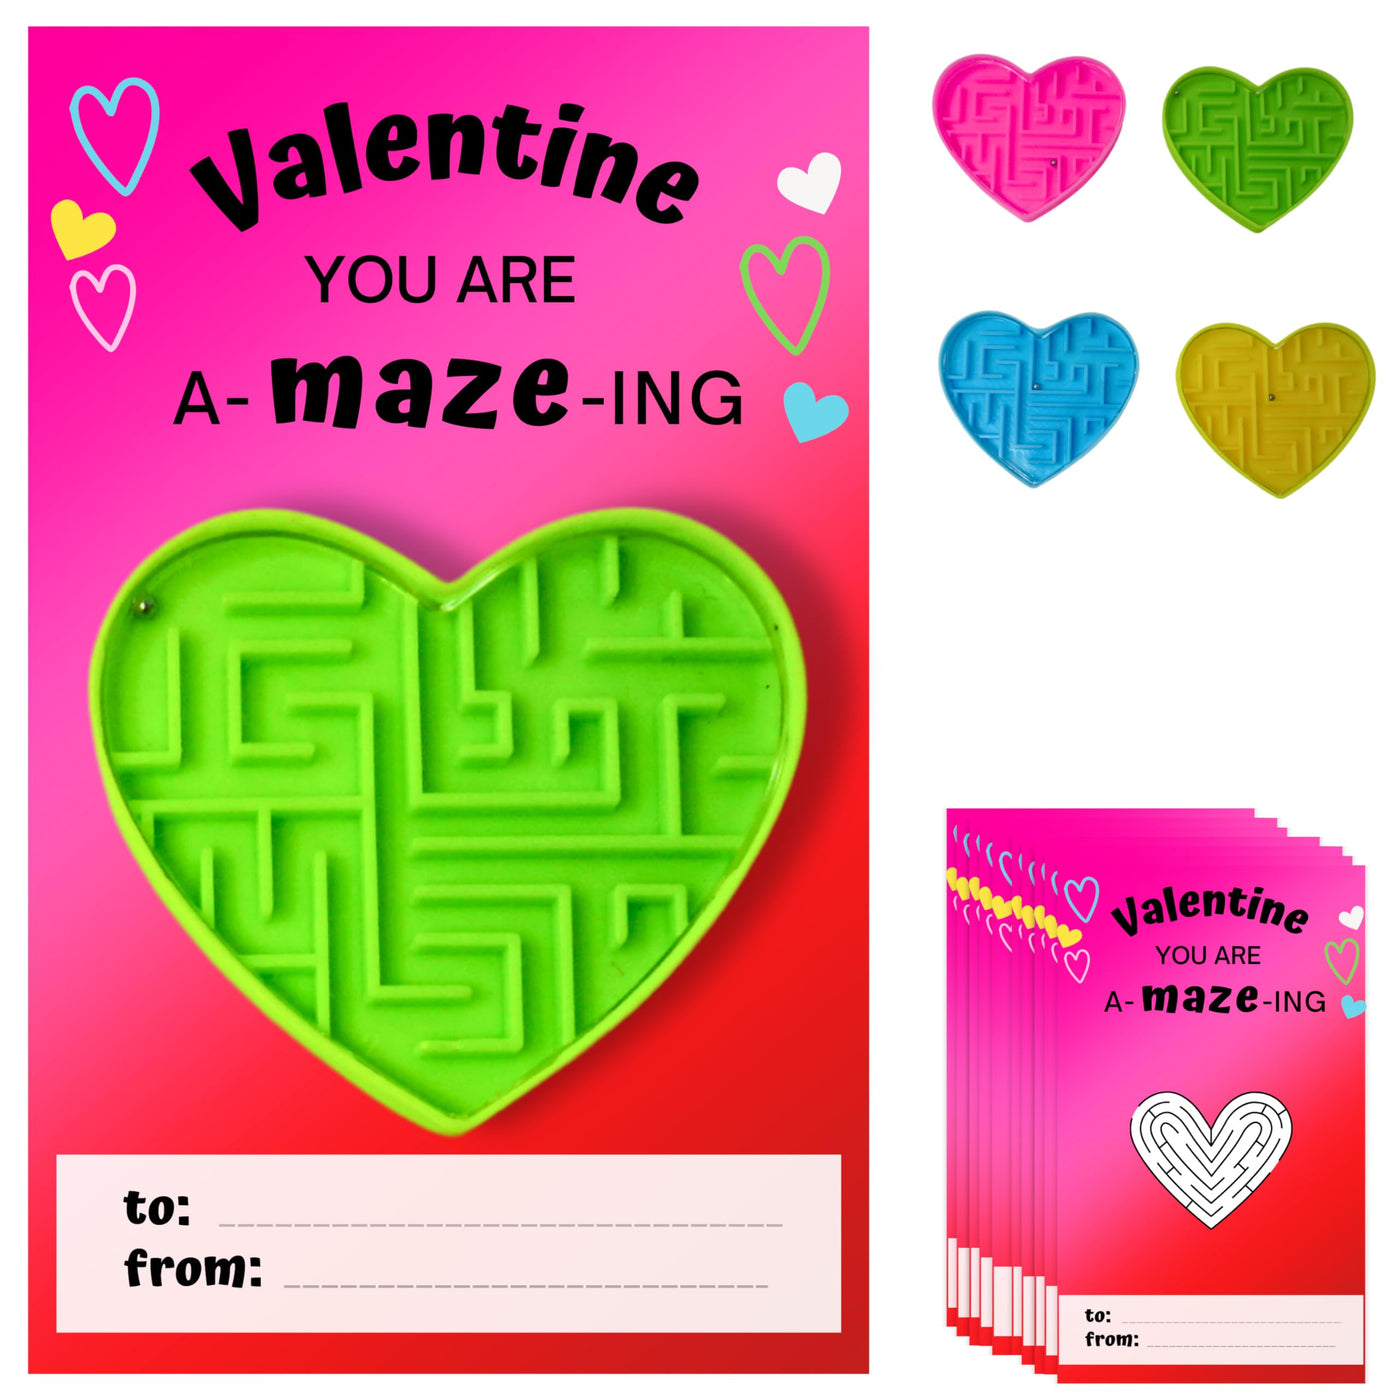 4E's Novelty 36 Pack Valentine's Day Heart Mazes with Valentine's Greeting Cards Gift Set for Kids Boys Girls, School Classroom Exchange Toy Bulk Party Favors, Valentine's Day Gifts for Kids